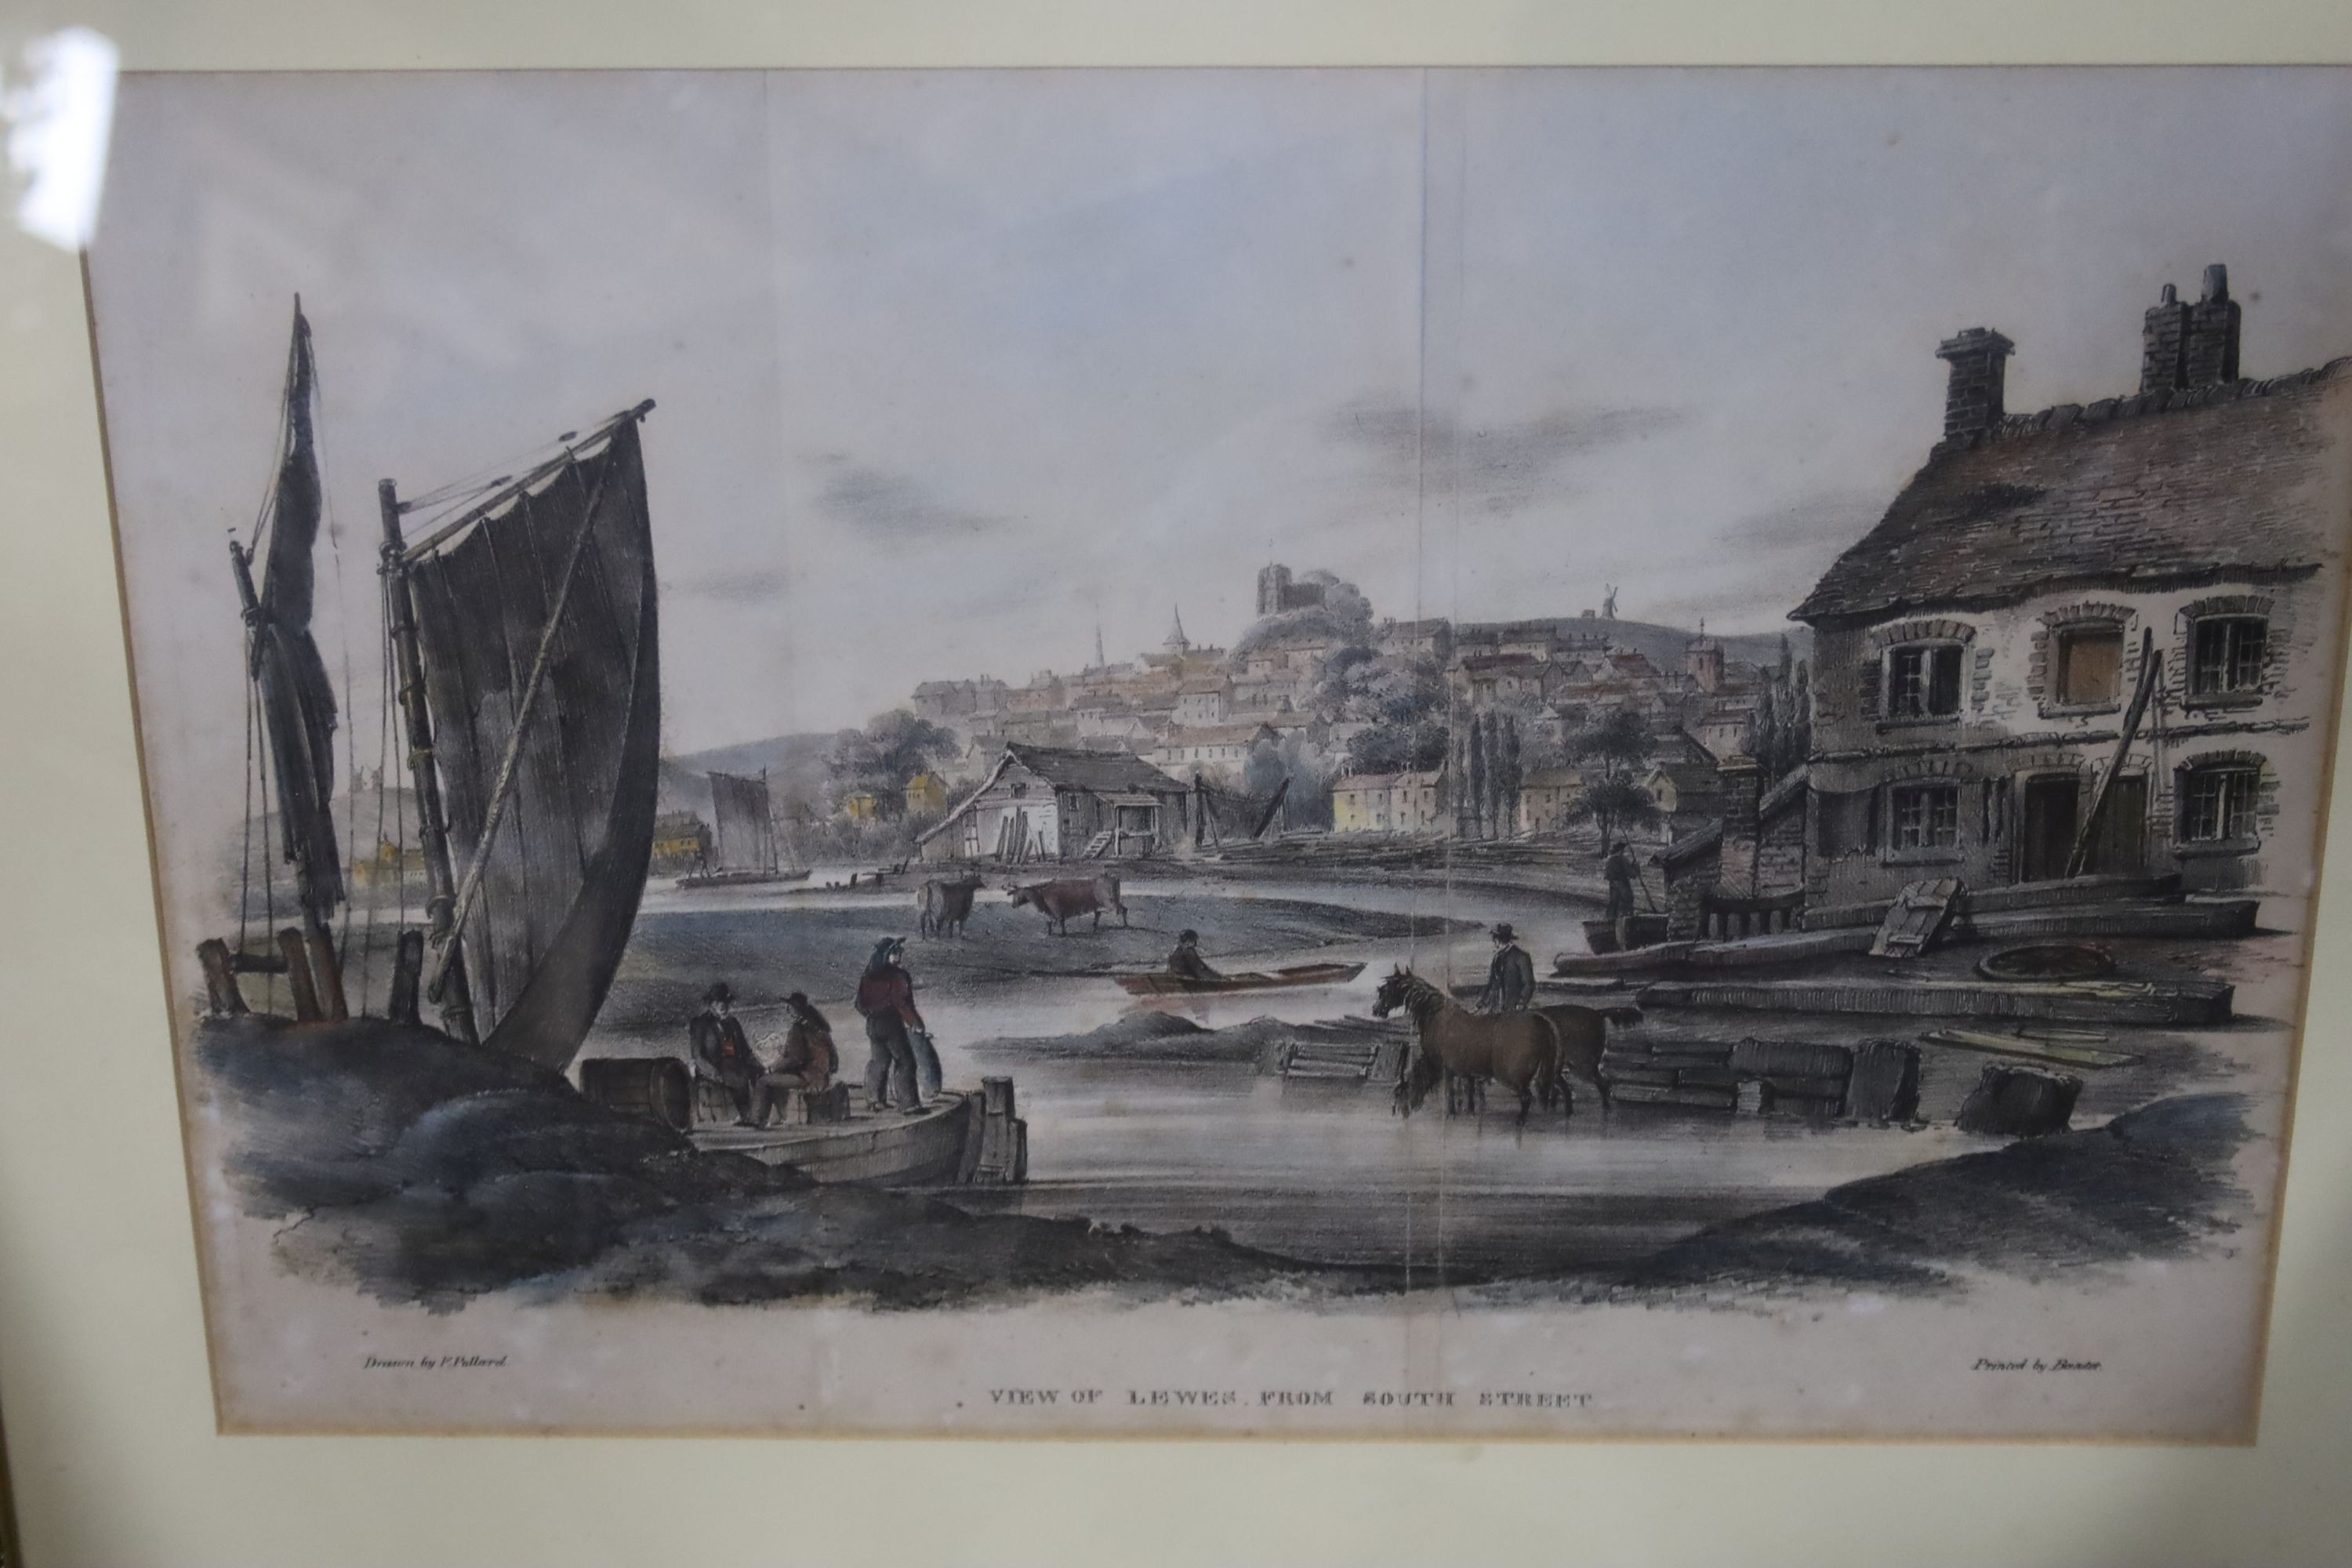 A collection of 18th/19th century prints of Lewes